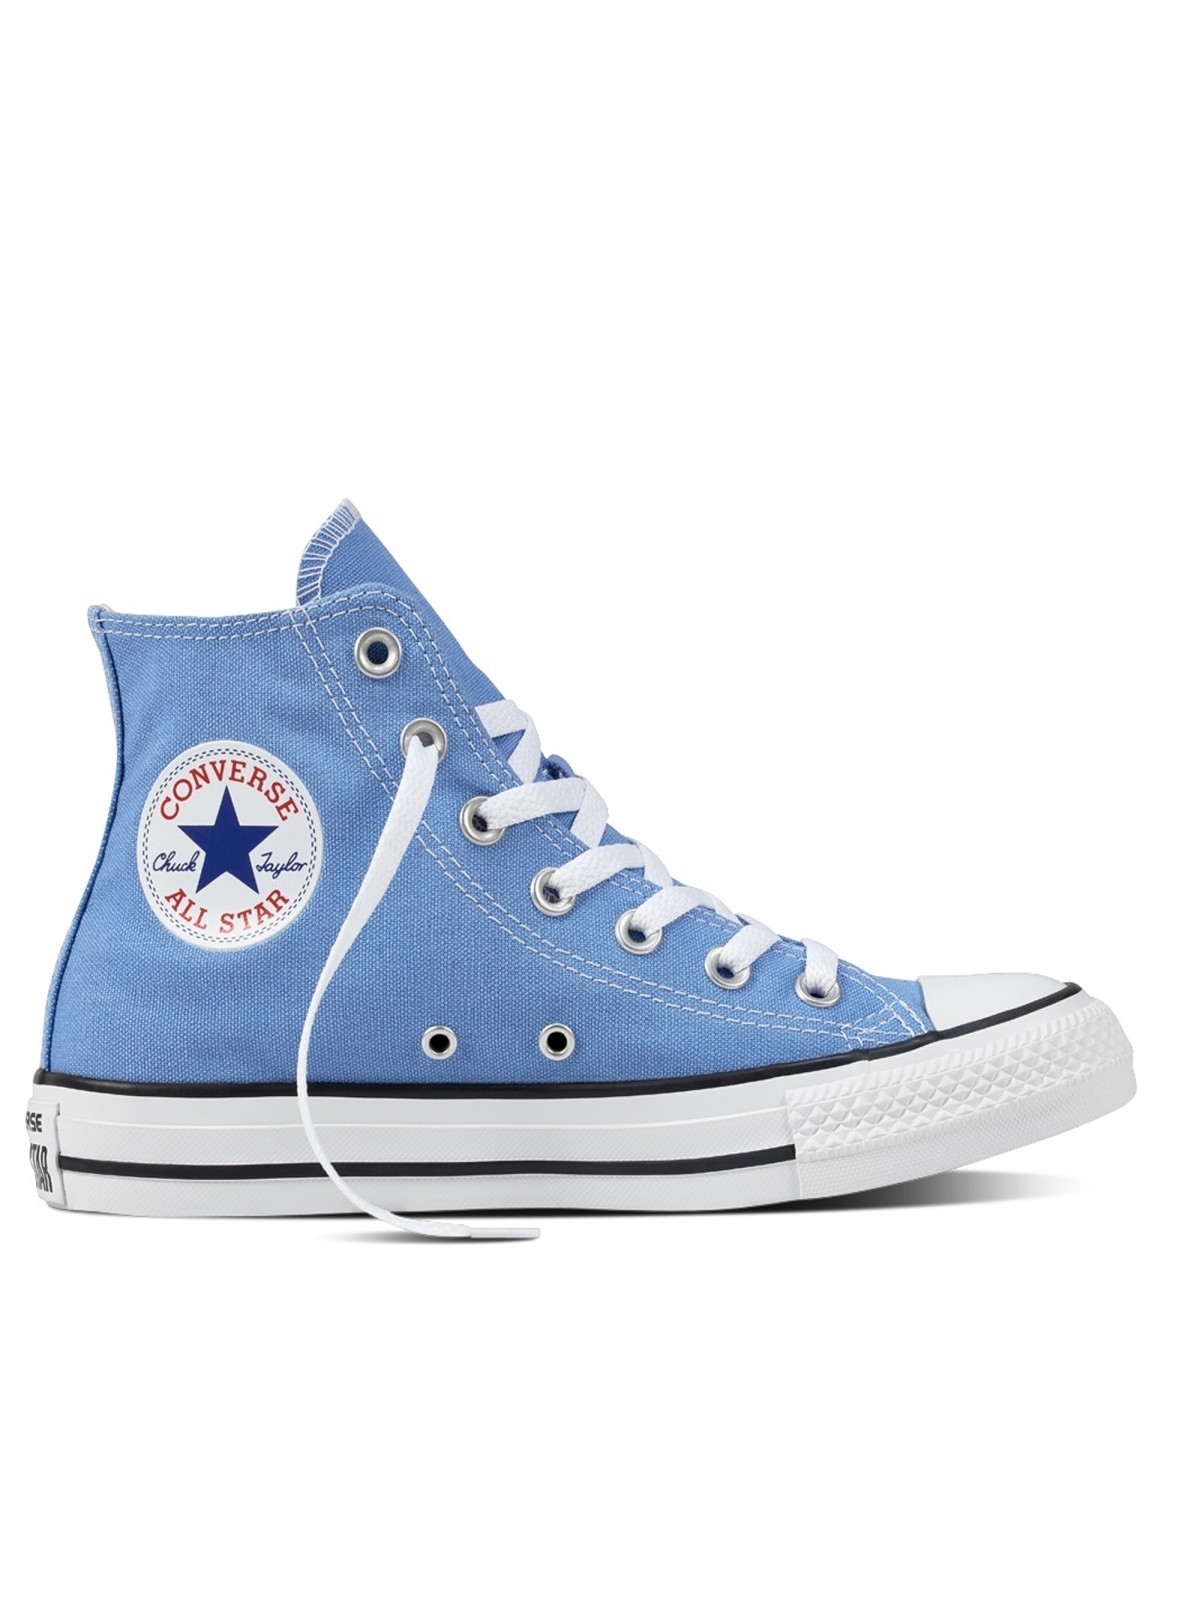 Converse Chuck Taylor all star toile pioneer blue